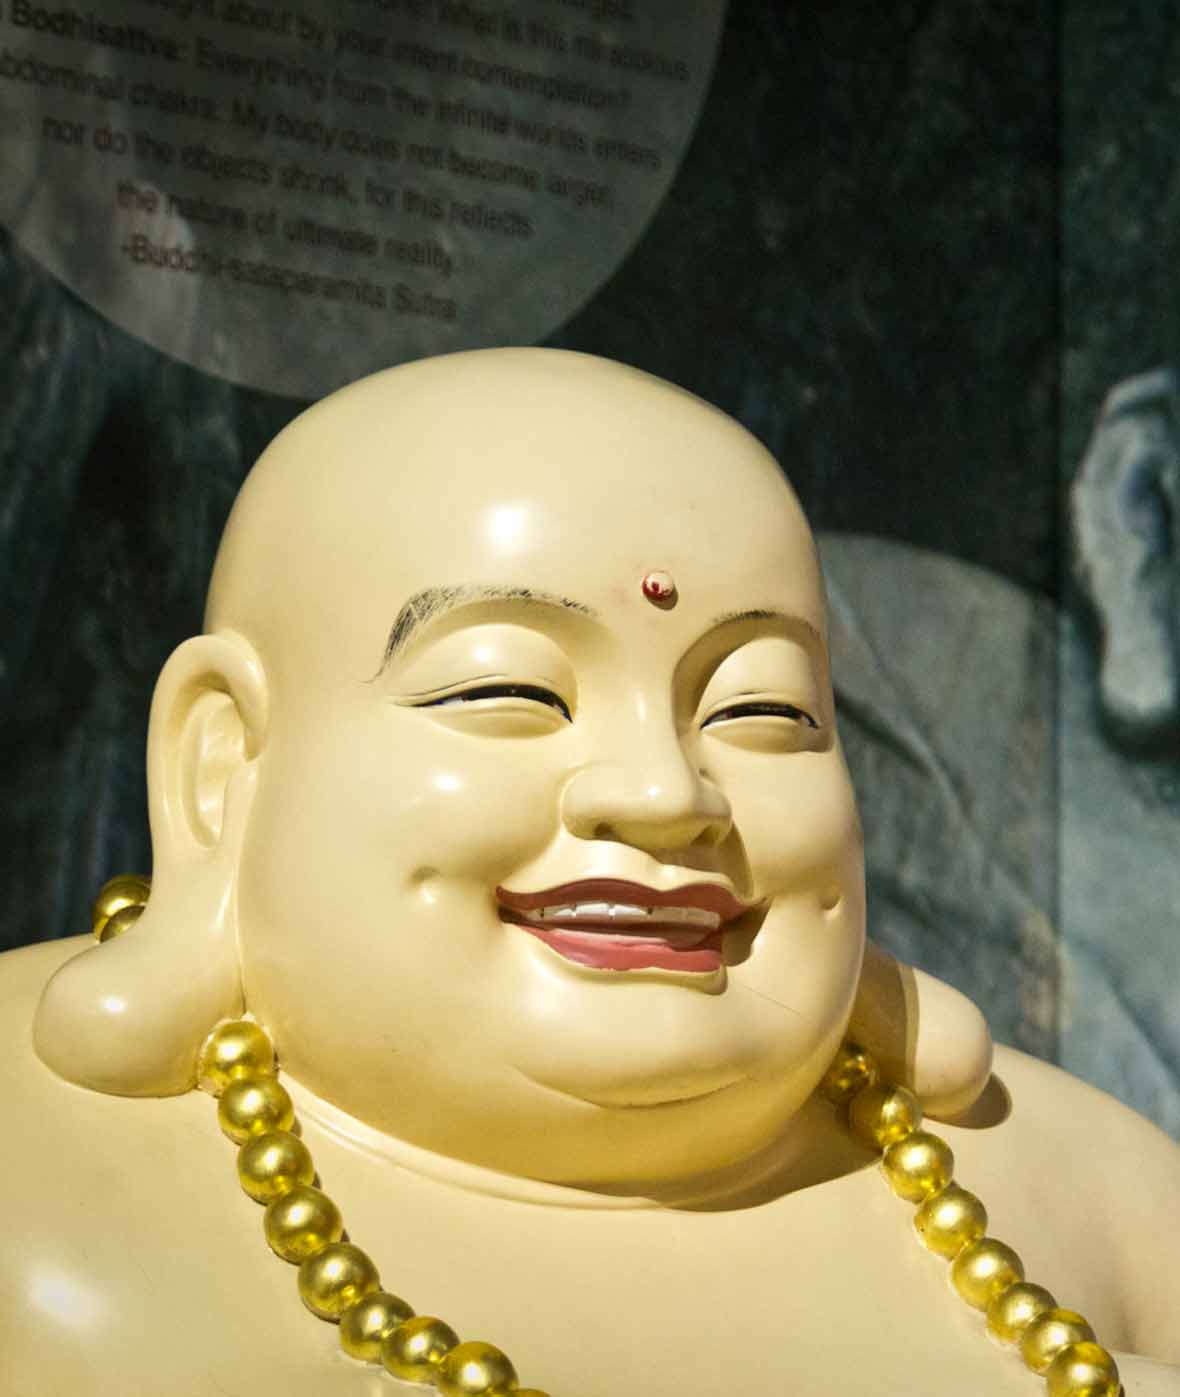 A statue of a fat smiling Buddha